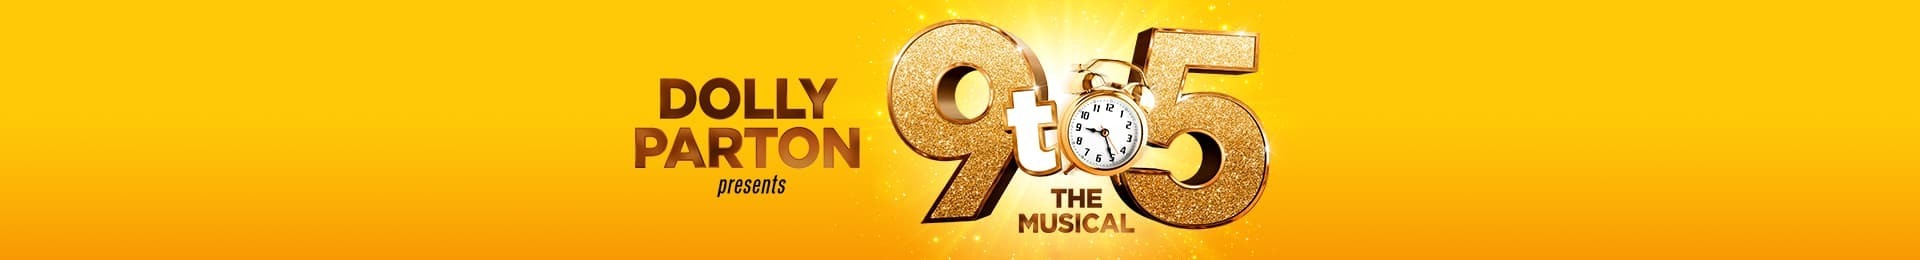 9 to 5: The Musical and Dinner at Bella Italia - Strand tickets at the Savoy Theatre, London